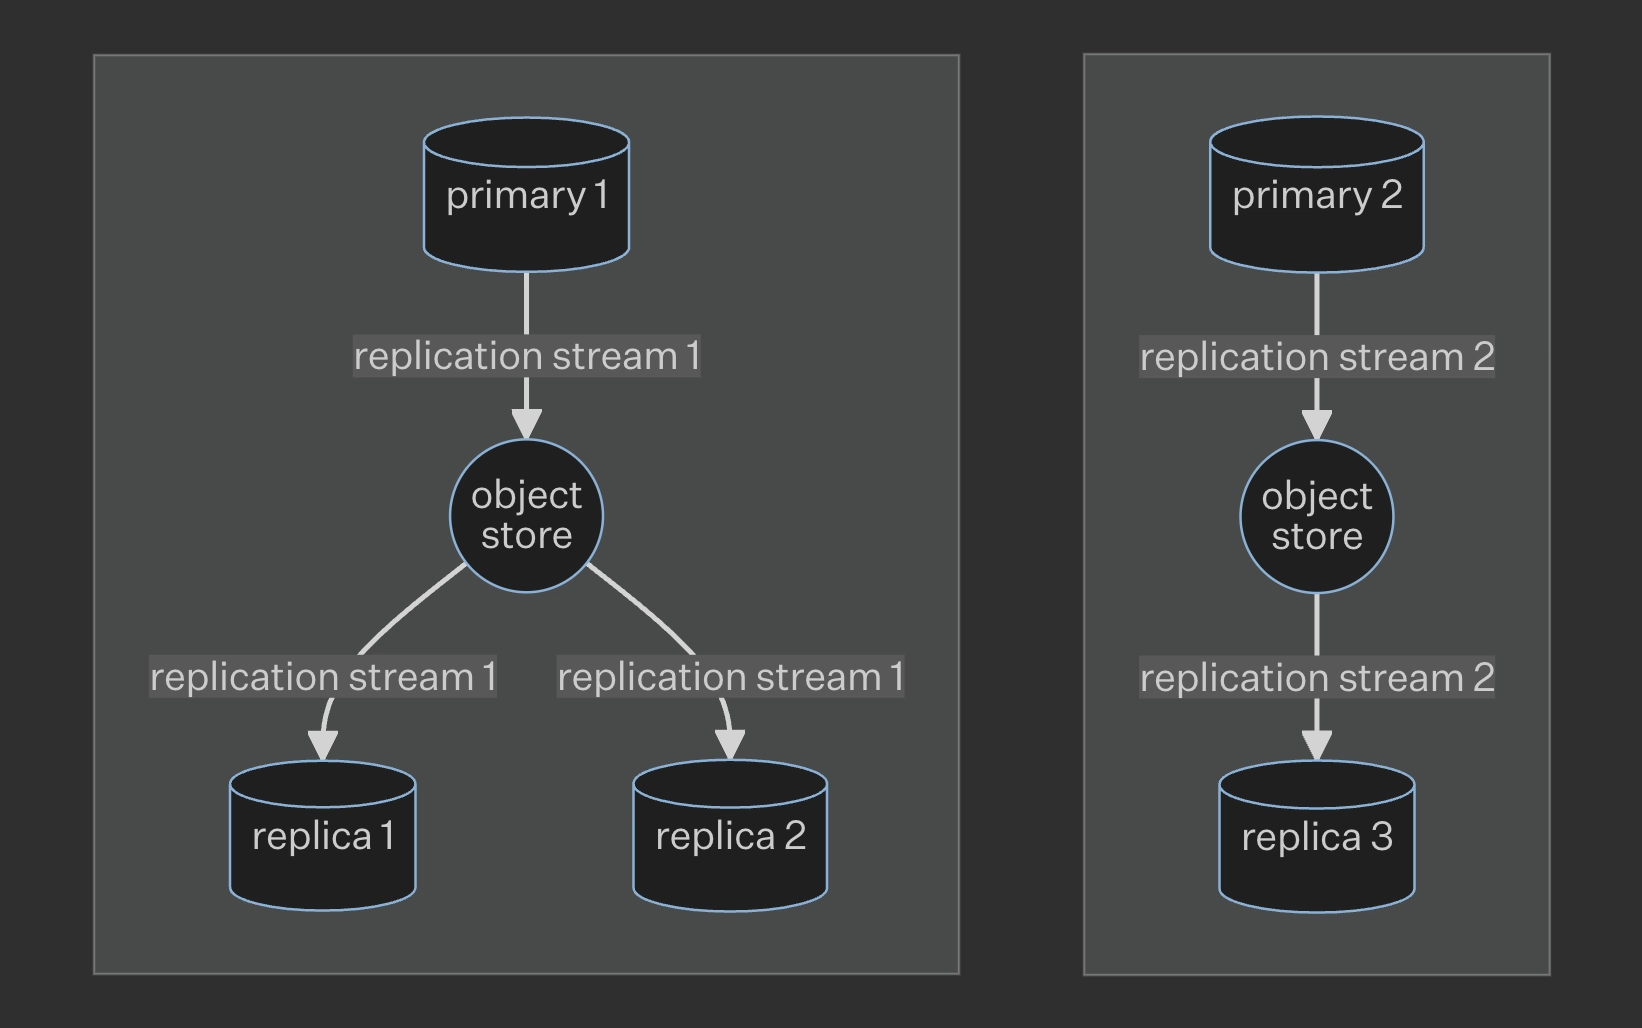 Two primaries sharing an object store service.